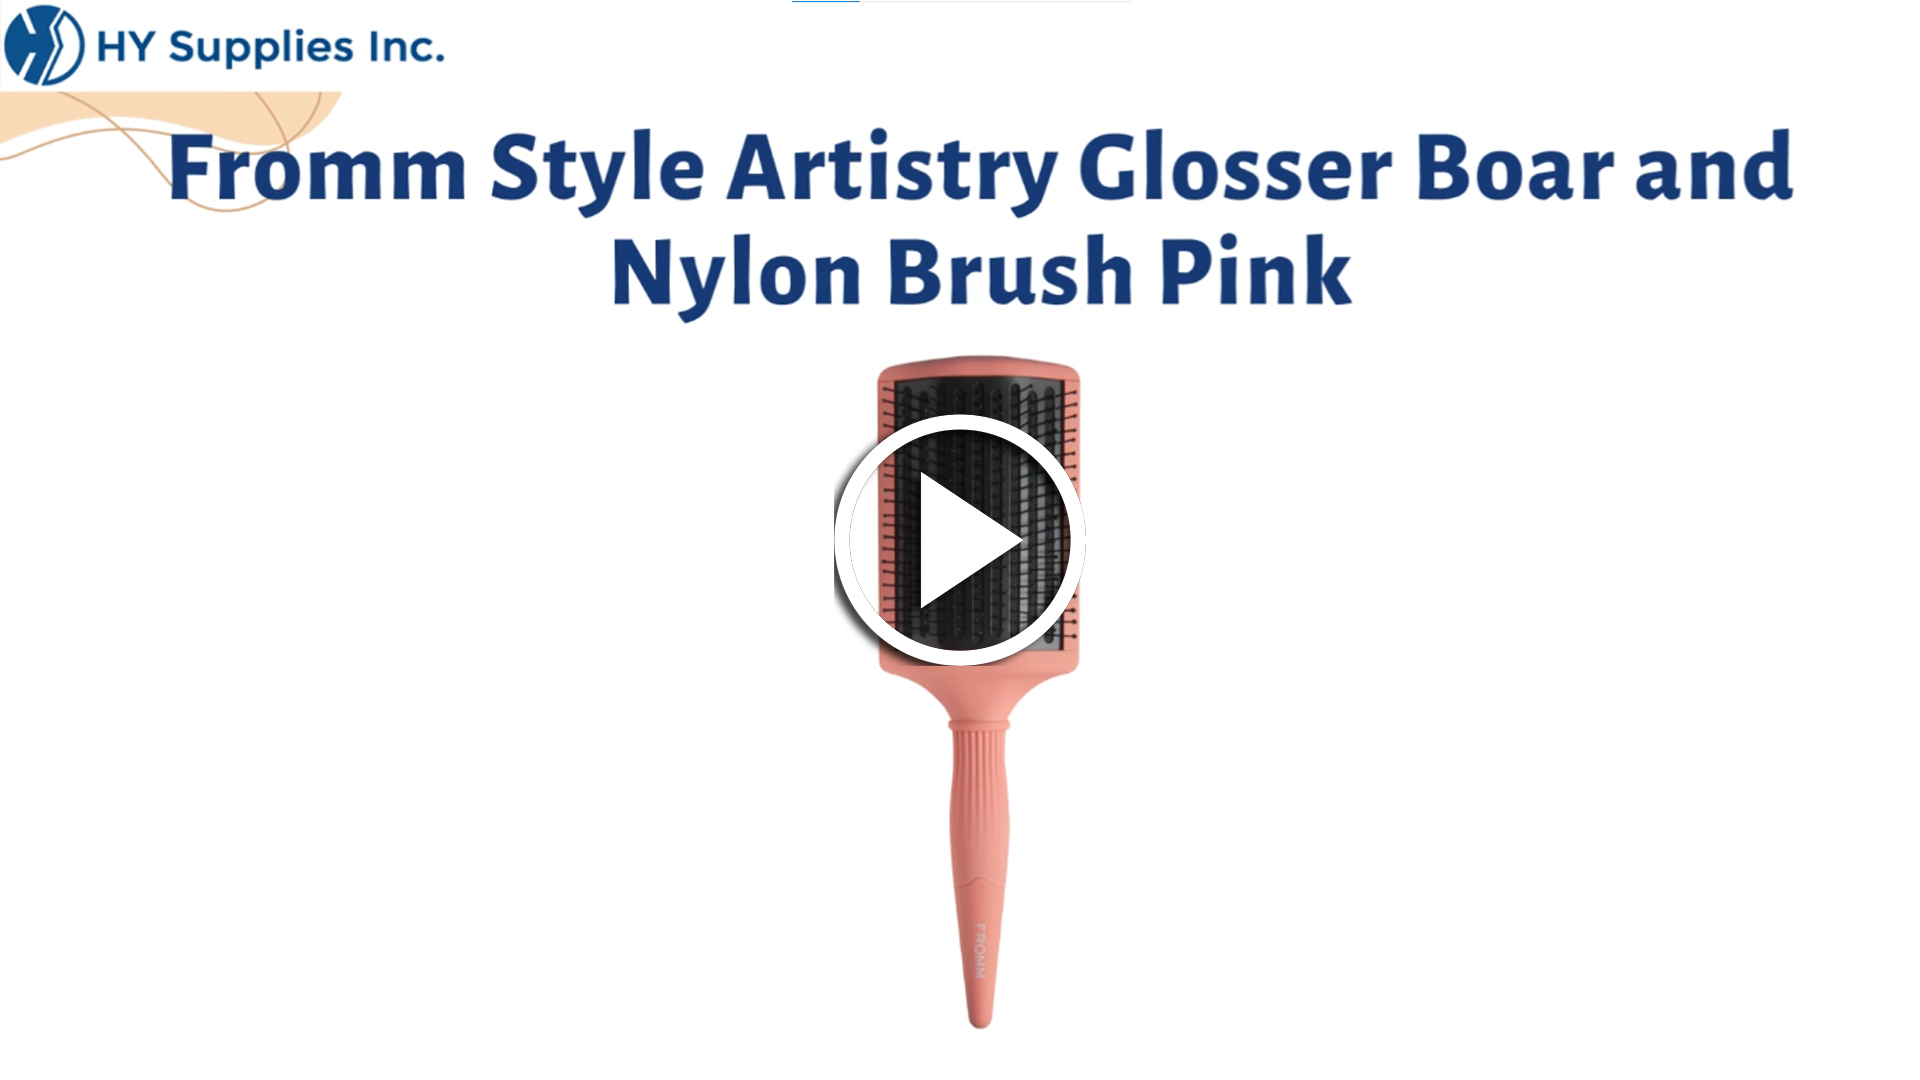 Fromm Style Artistry Glosser Boar and Nylon Brush Pink